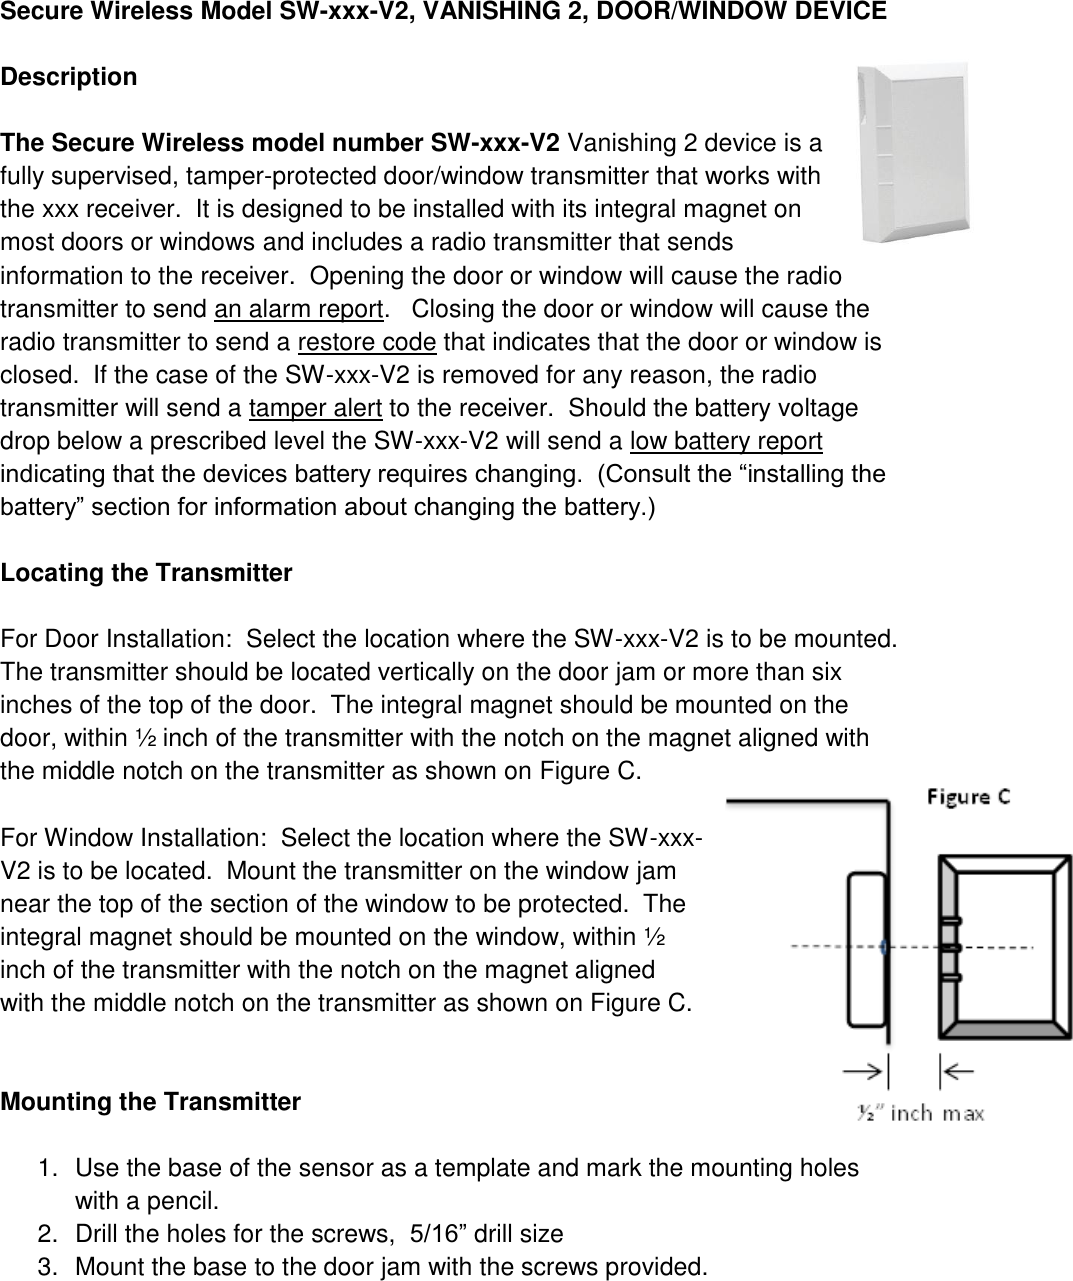    Secure Wireless Model SW-xxx-V2, VANISHING 2, DOOR/WINDOW DEVICE   Description  The Secure Wireless model number SW-xxx-V2 Vanishing 2 device is a fully supervised, tamper-protected door/window transmitter that works with the xxx receiver.  It is designed to be installed with its integral magnet on most doors or windows and includes a radio transmitter that sends information to the receiver.  Opening the door or window will cause the radio transmitter to send an alarm report.   Closing the door or window will cause the radio transmitter to send a restore code that indicates that the door or window is closed.  If the case of the SW-xxx-V2 is removed for any reason, the radio transmitter will send a tamper alert to the receiver.  Should the battery voltage drop below a prescribed level the SW-xxx-V2 will send a low battery report indicating that the devices battery requires changing.  (Consult the “installing the battery” section for information about changing the battery.)  Locating the Transmitter  For Door Installation:  Select the location where the SW-xxx-V2 is to be mounted.  The transmitter should be located vertically on the door jam or more than six inches of the top of the door.  The integral magnet should be mounted on the door, within ½ inch of the transmitter with the notch on the magnet aligned with the middle notch on the transmitter as shown on Figure C.  For Window Installation:  Select the location where the SW-xxx-V2 is to be located.  Mount the transmitter on the window jam near the top of the section of the window to be protected.  The integral magnet should be mounted on the window, within ½ inch of the transmitter with the notch on the magnet aligned with the middle notch on the transmitter as shown on Figure C.    Mounting the Transmitter  1.  Use the base of the sensor as a template and mark the mounting holes with a pencil. 2.  Drill the holes for the screws,  5/16” drill size 3.  Mount the base to the door jam with the screws provided. 